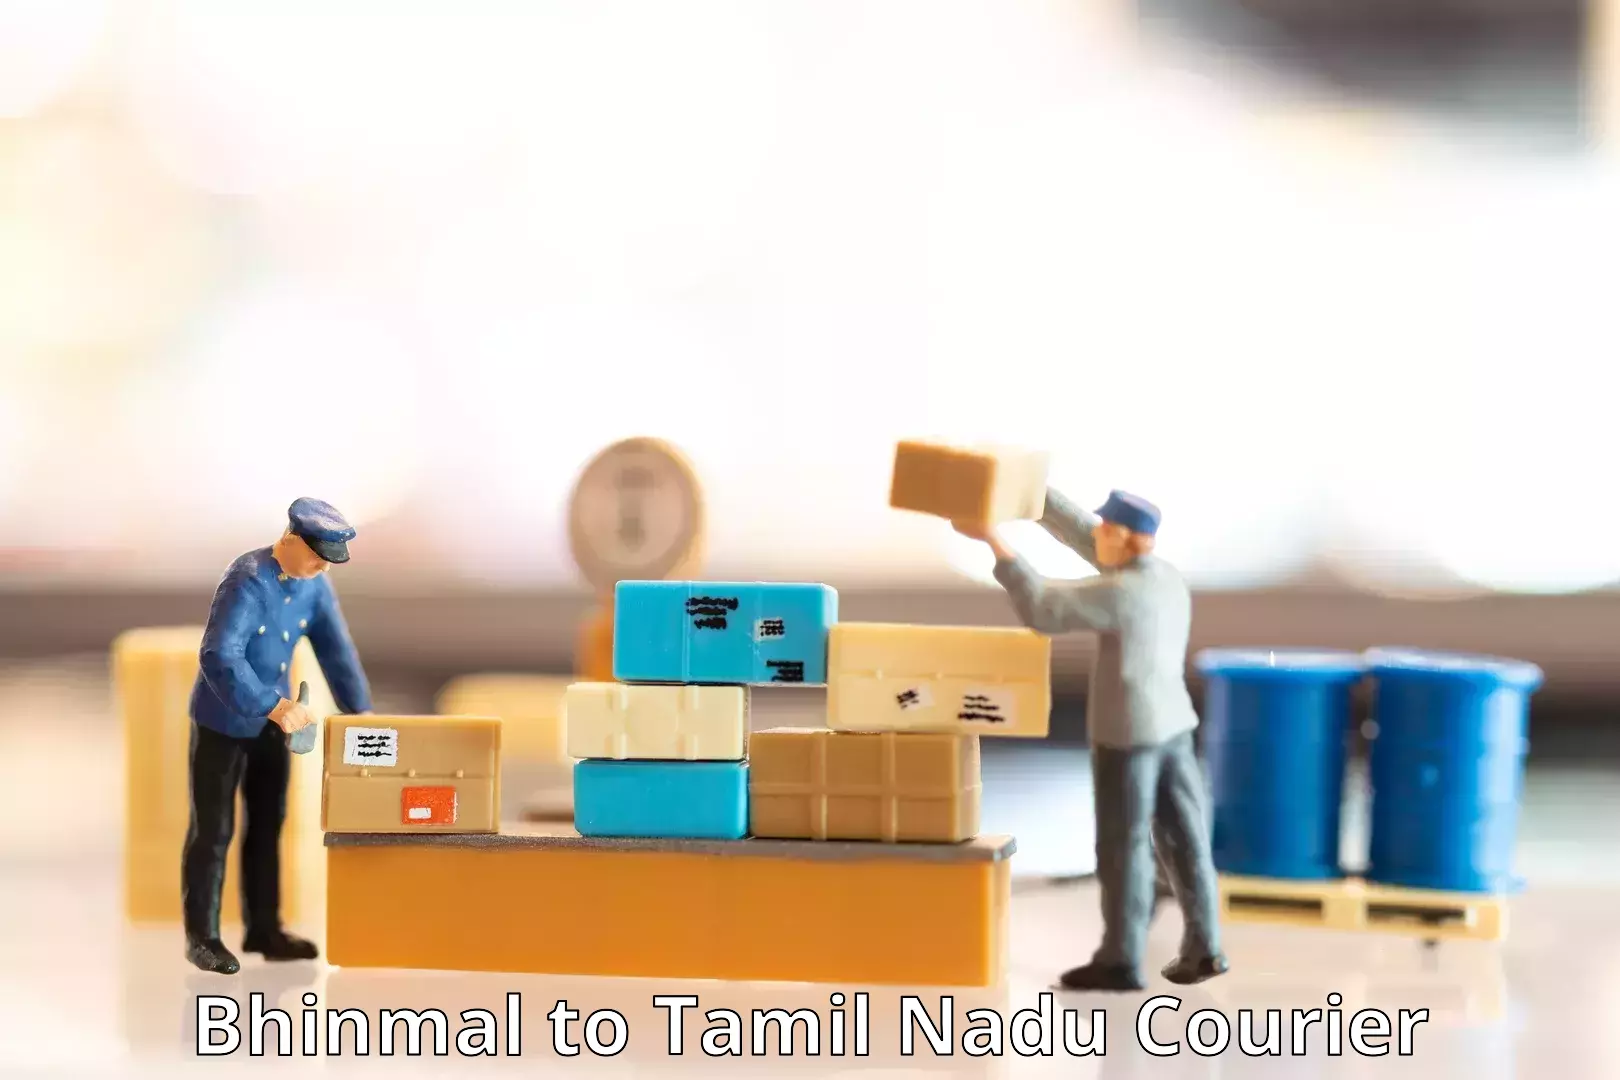 Customizable delivery plans in Bhinmal to Tamil Nadu